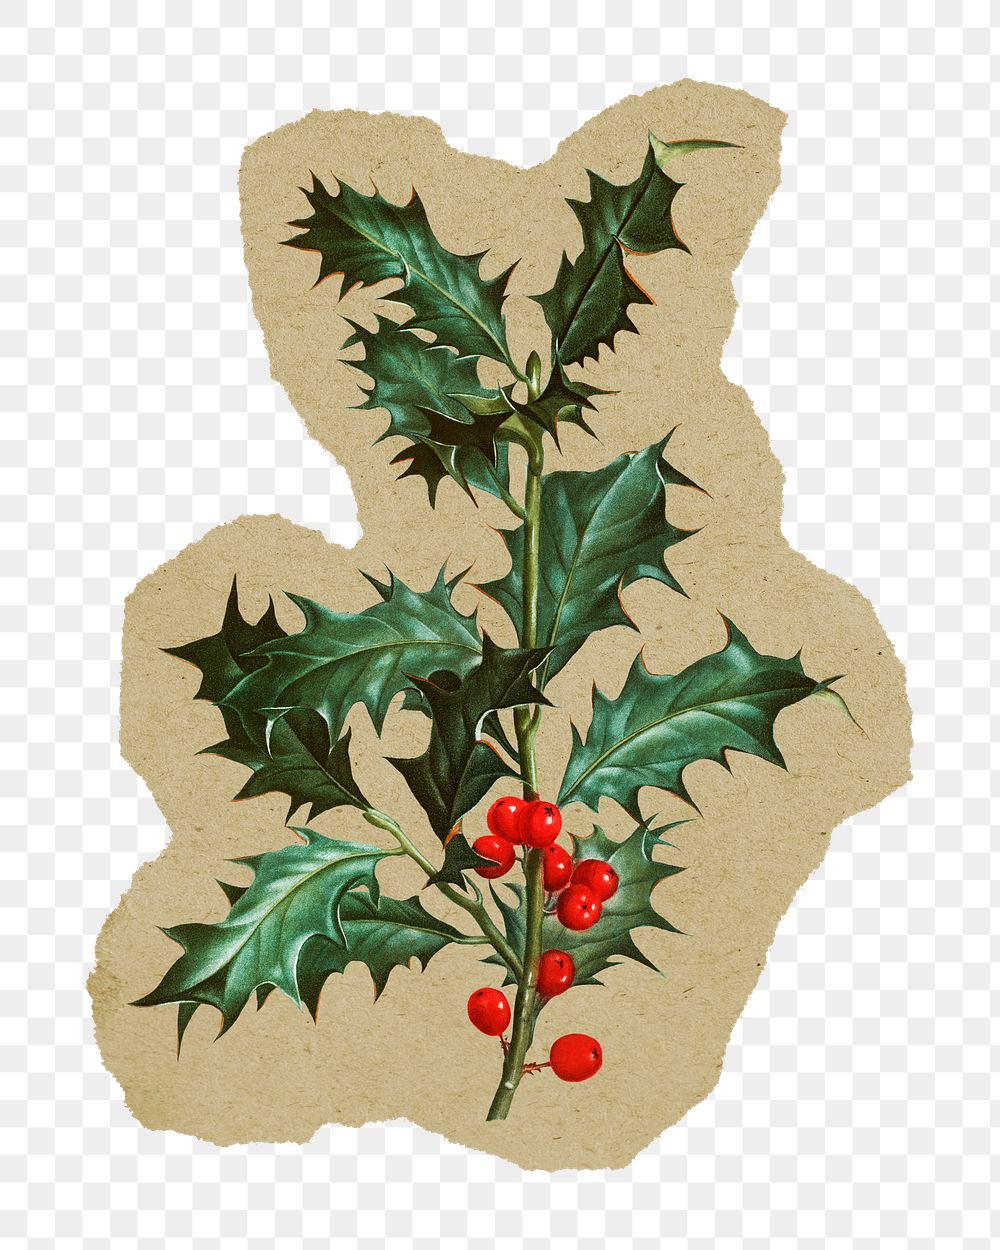 Png common holly sticker, Redoute's vintage illustration on ripped paper, transparent background